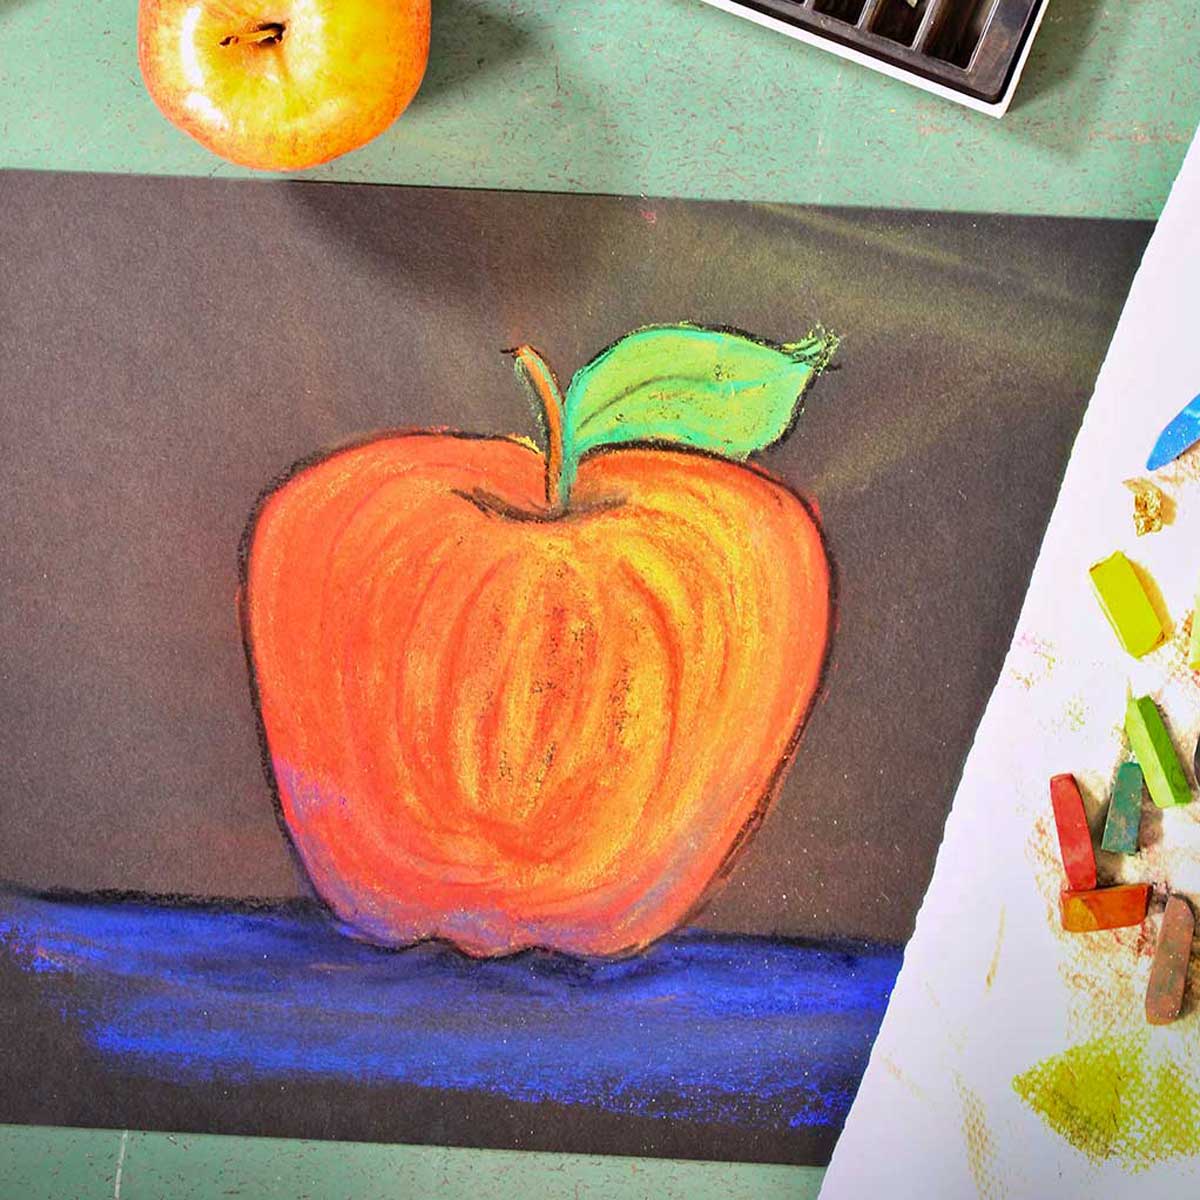 Drawing of apple, fresh apple and pastels on a green counter.